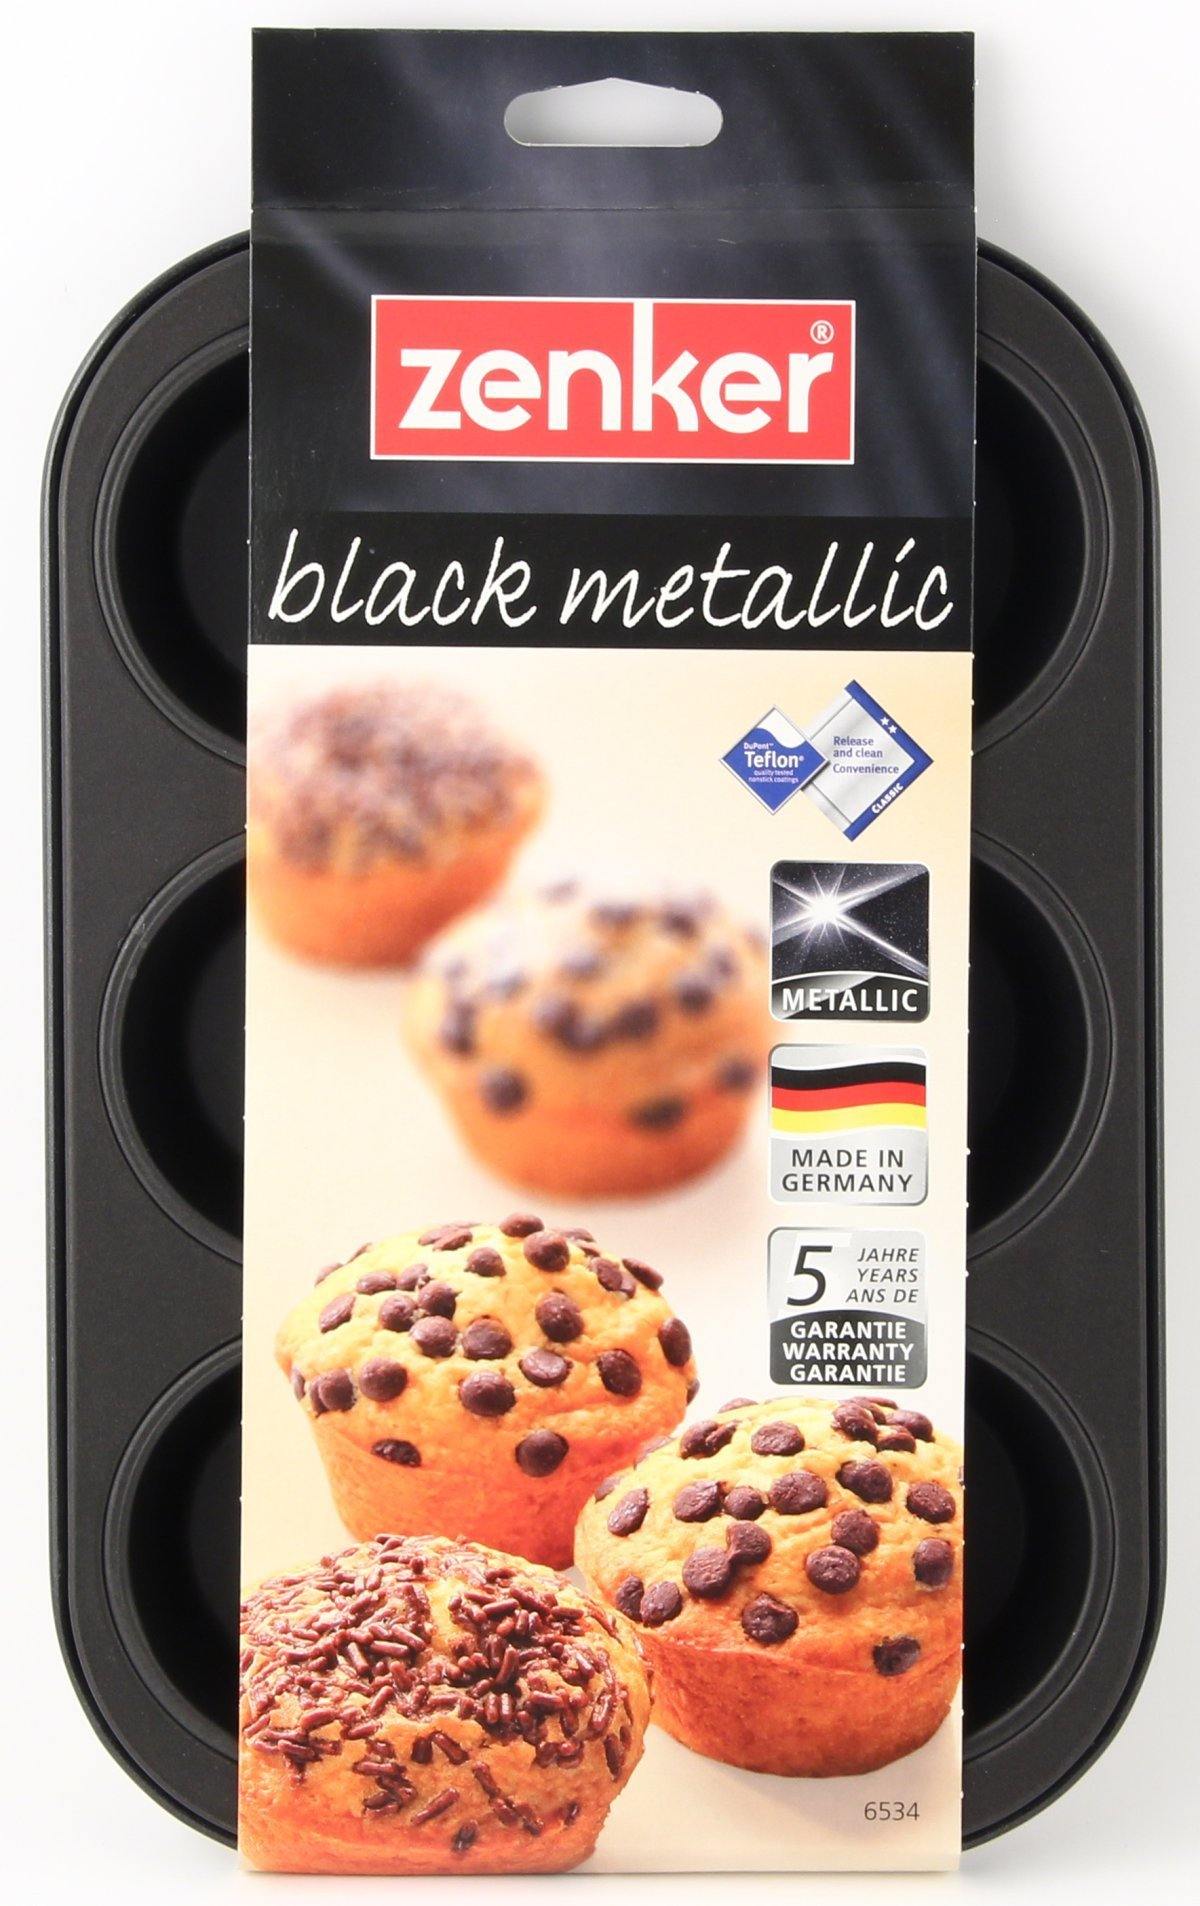 Zenker  "Black/Metallic" Mini-Muffin Tin For Muffins, 28X19X3 cm - Whole and All